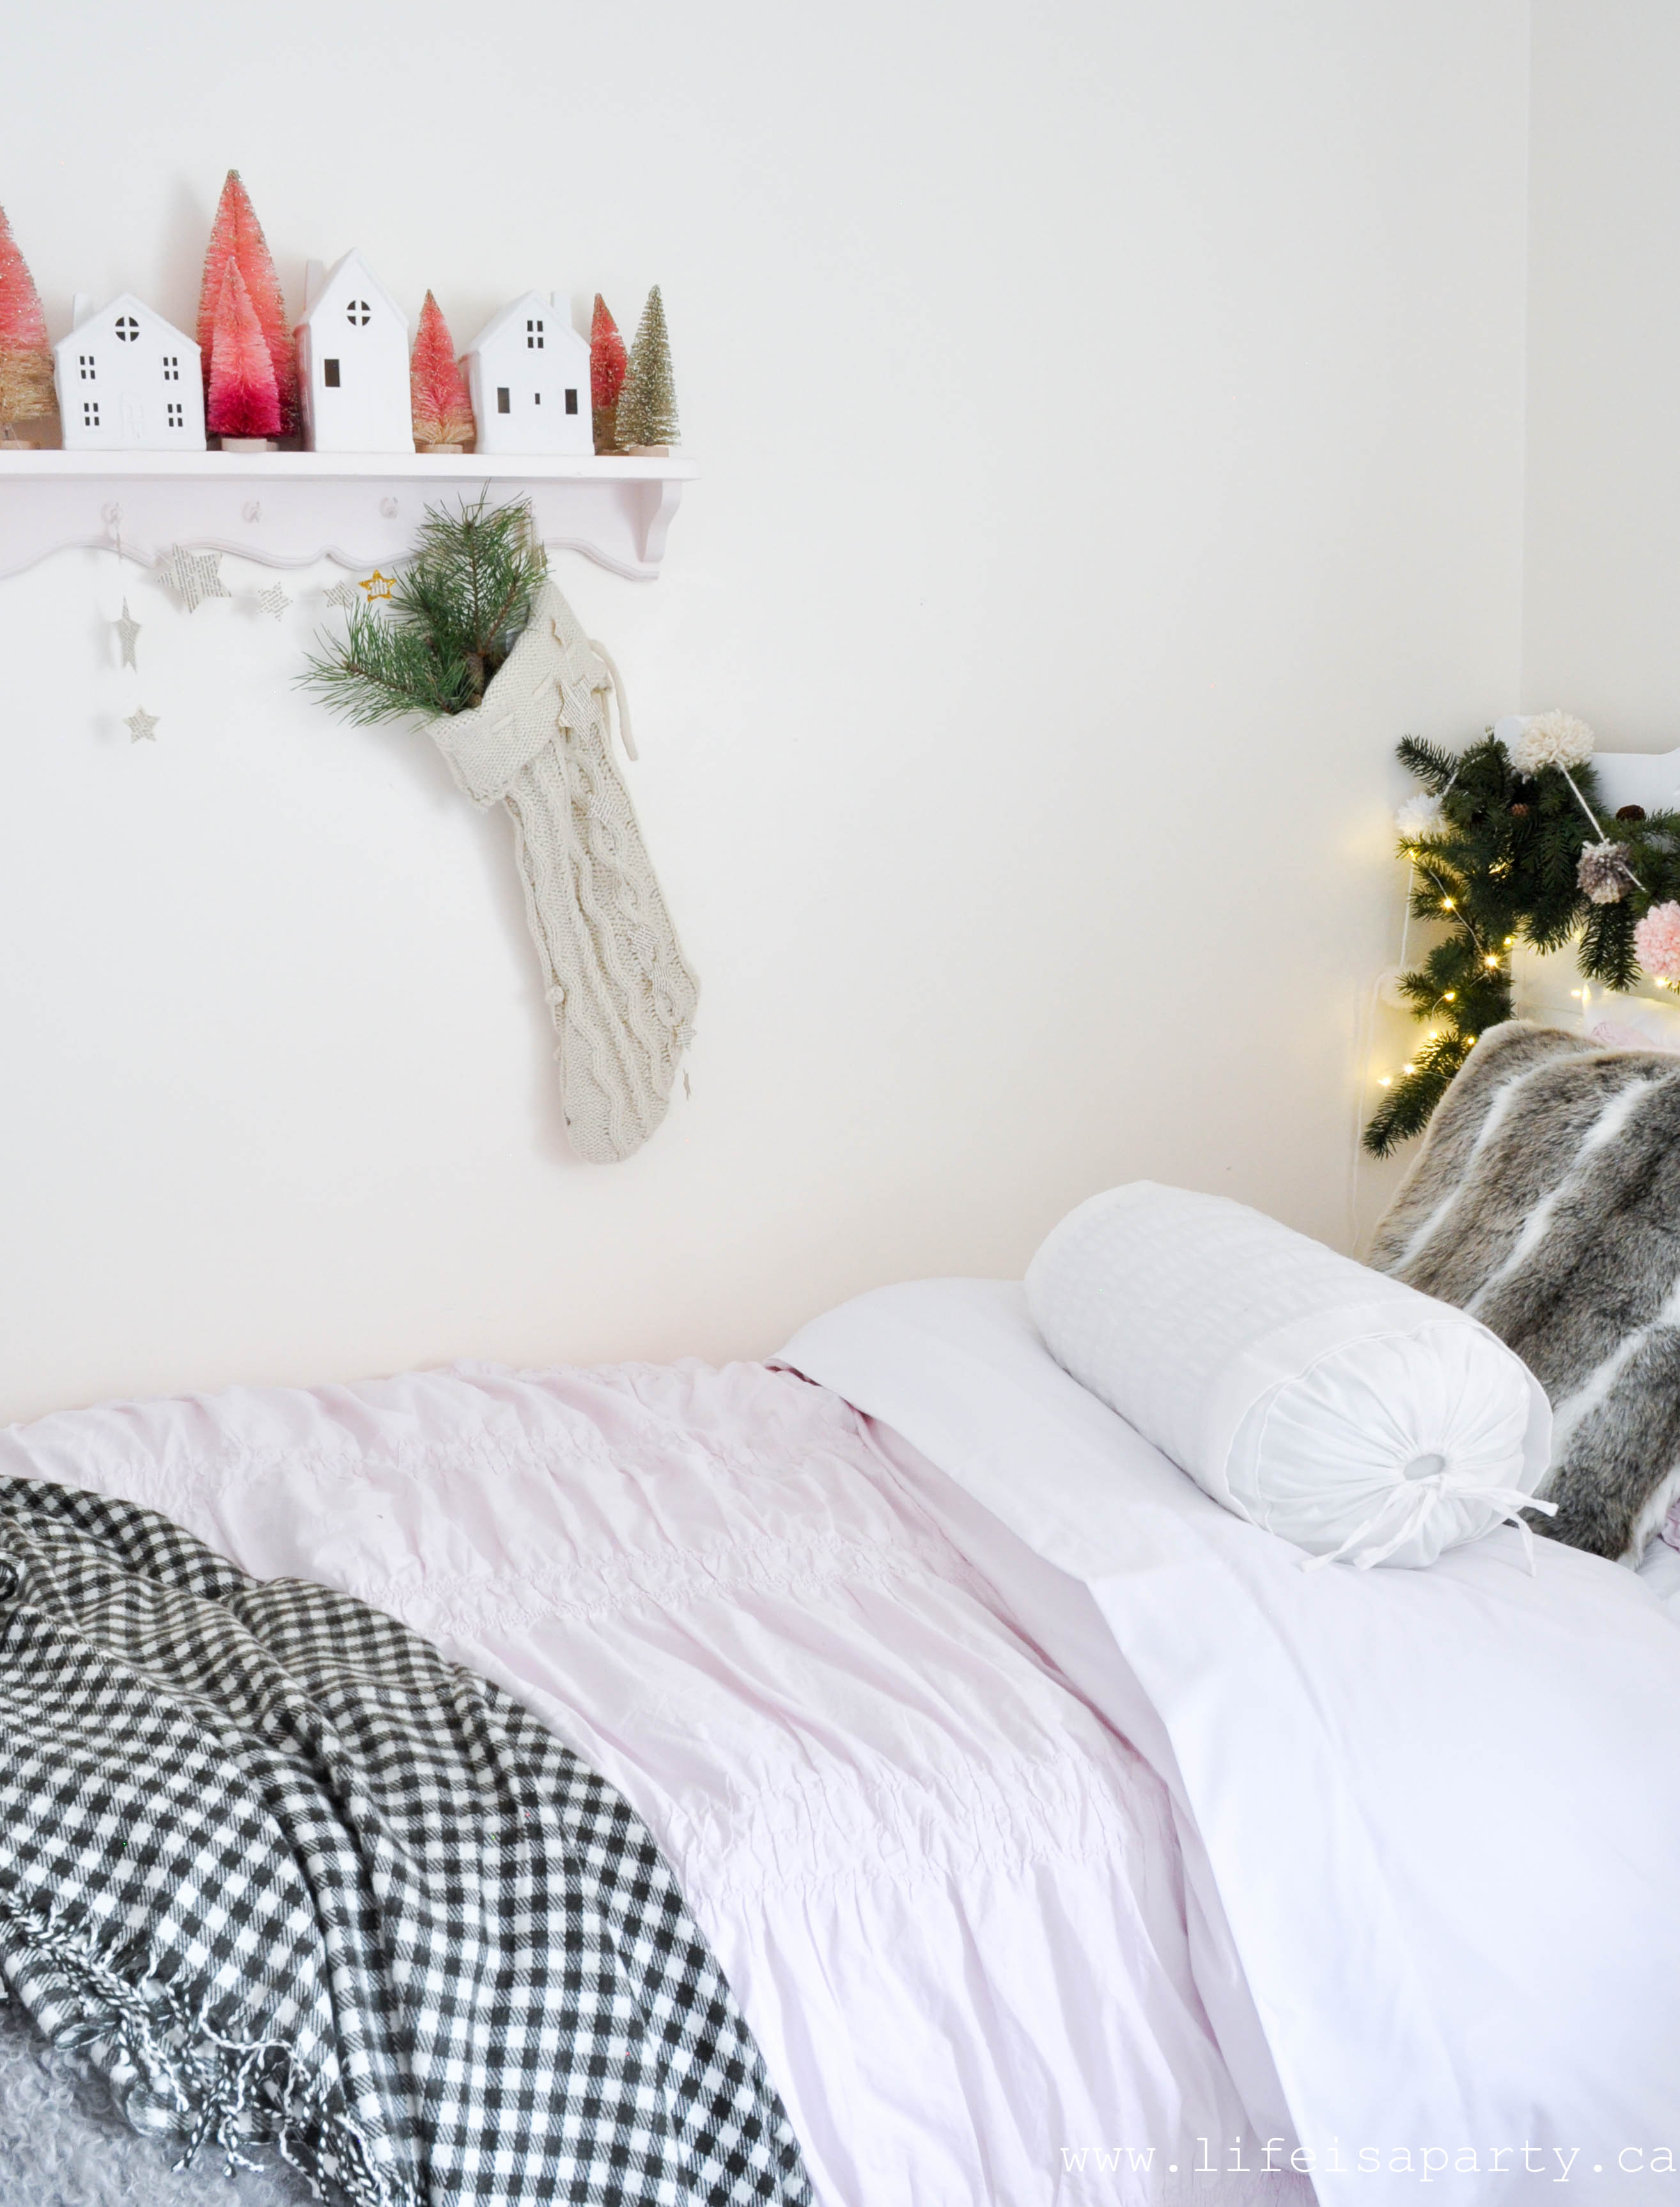 Little Girl's Christmas Bedroom -Add some coziness with warm throws, pom pom garland, and twinkle lights for any little girl's delight!